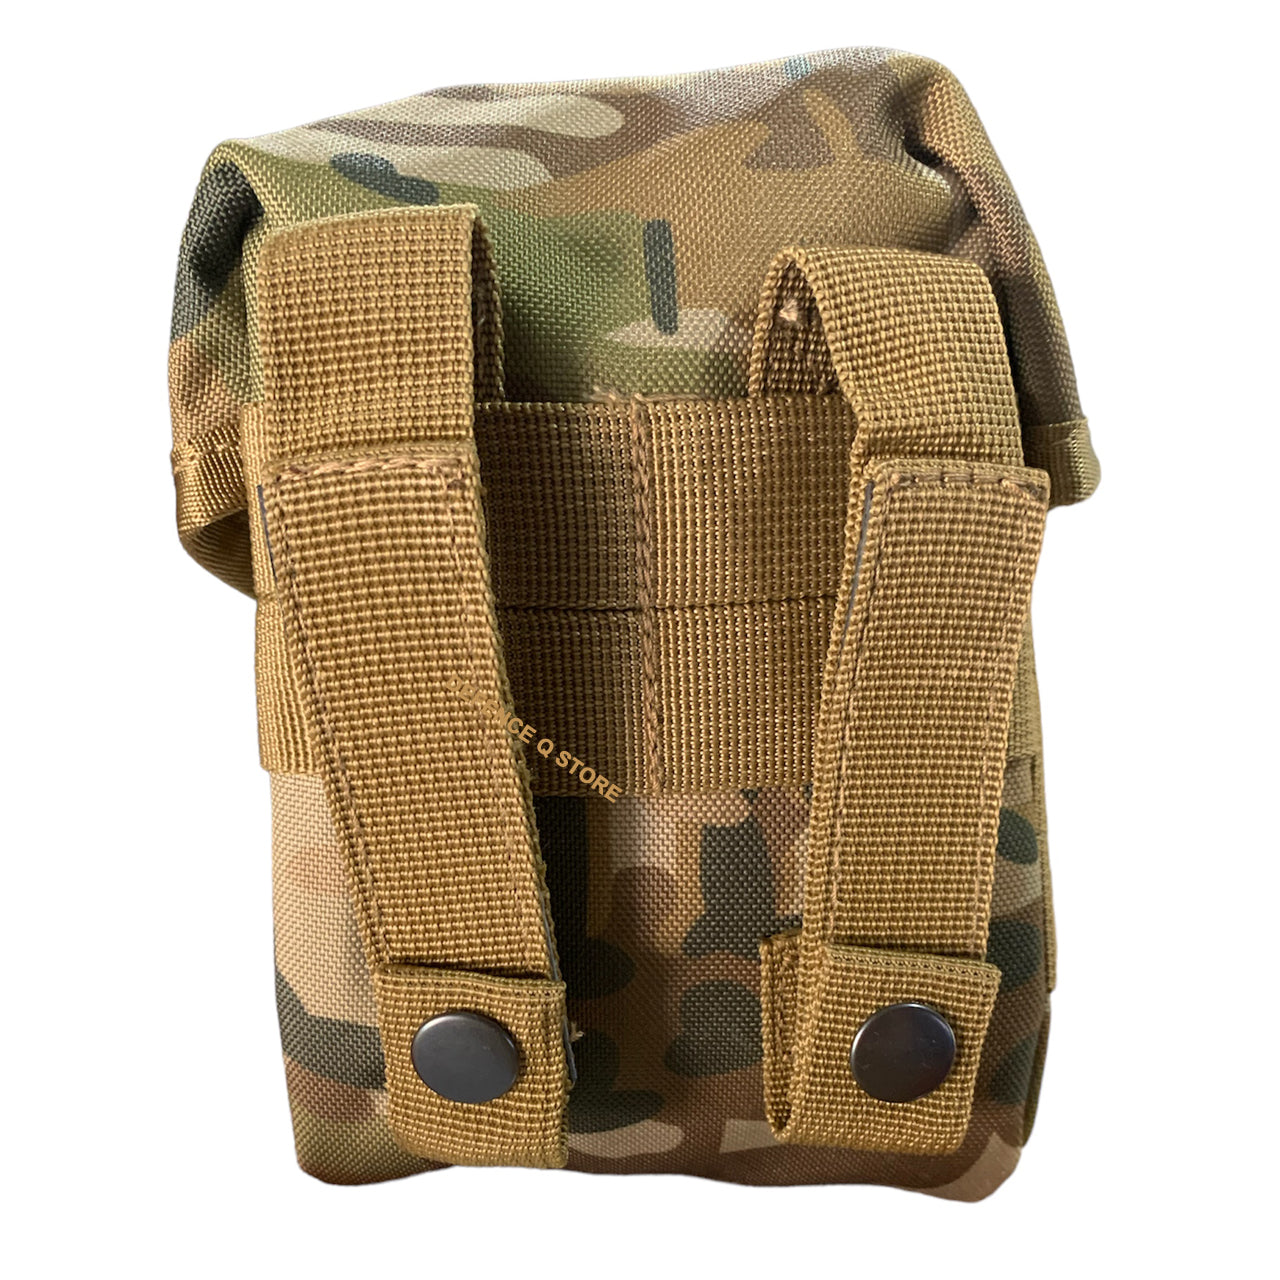 Exclusive to Defence Q Store, the Elite Tactical Premium Steyr Pouch AMC is perfect for those who value top-of-the-line gear. With MOLLE fittings, it can easily attach to webbing or vests, making it a versatile and essential part of your tactical setup. www.defenceqstore.com.au